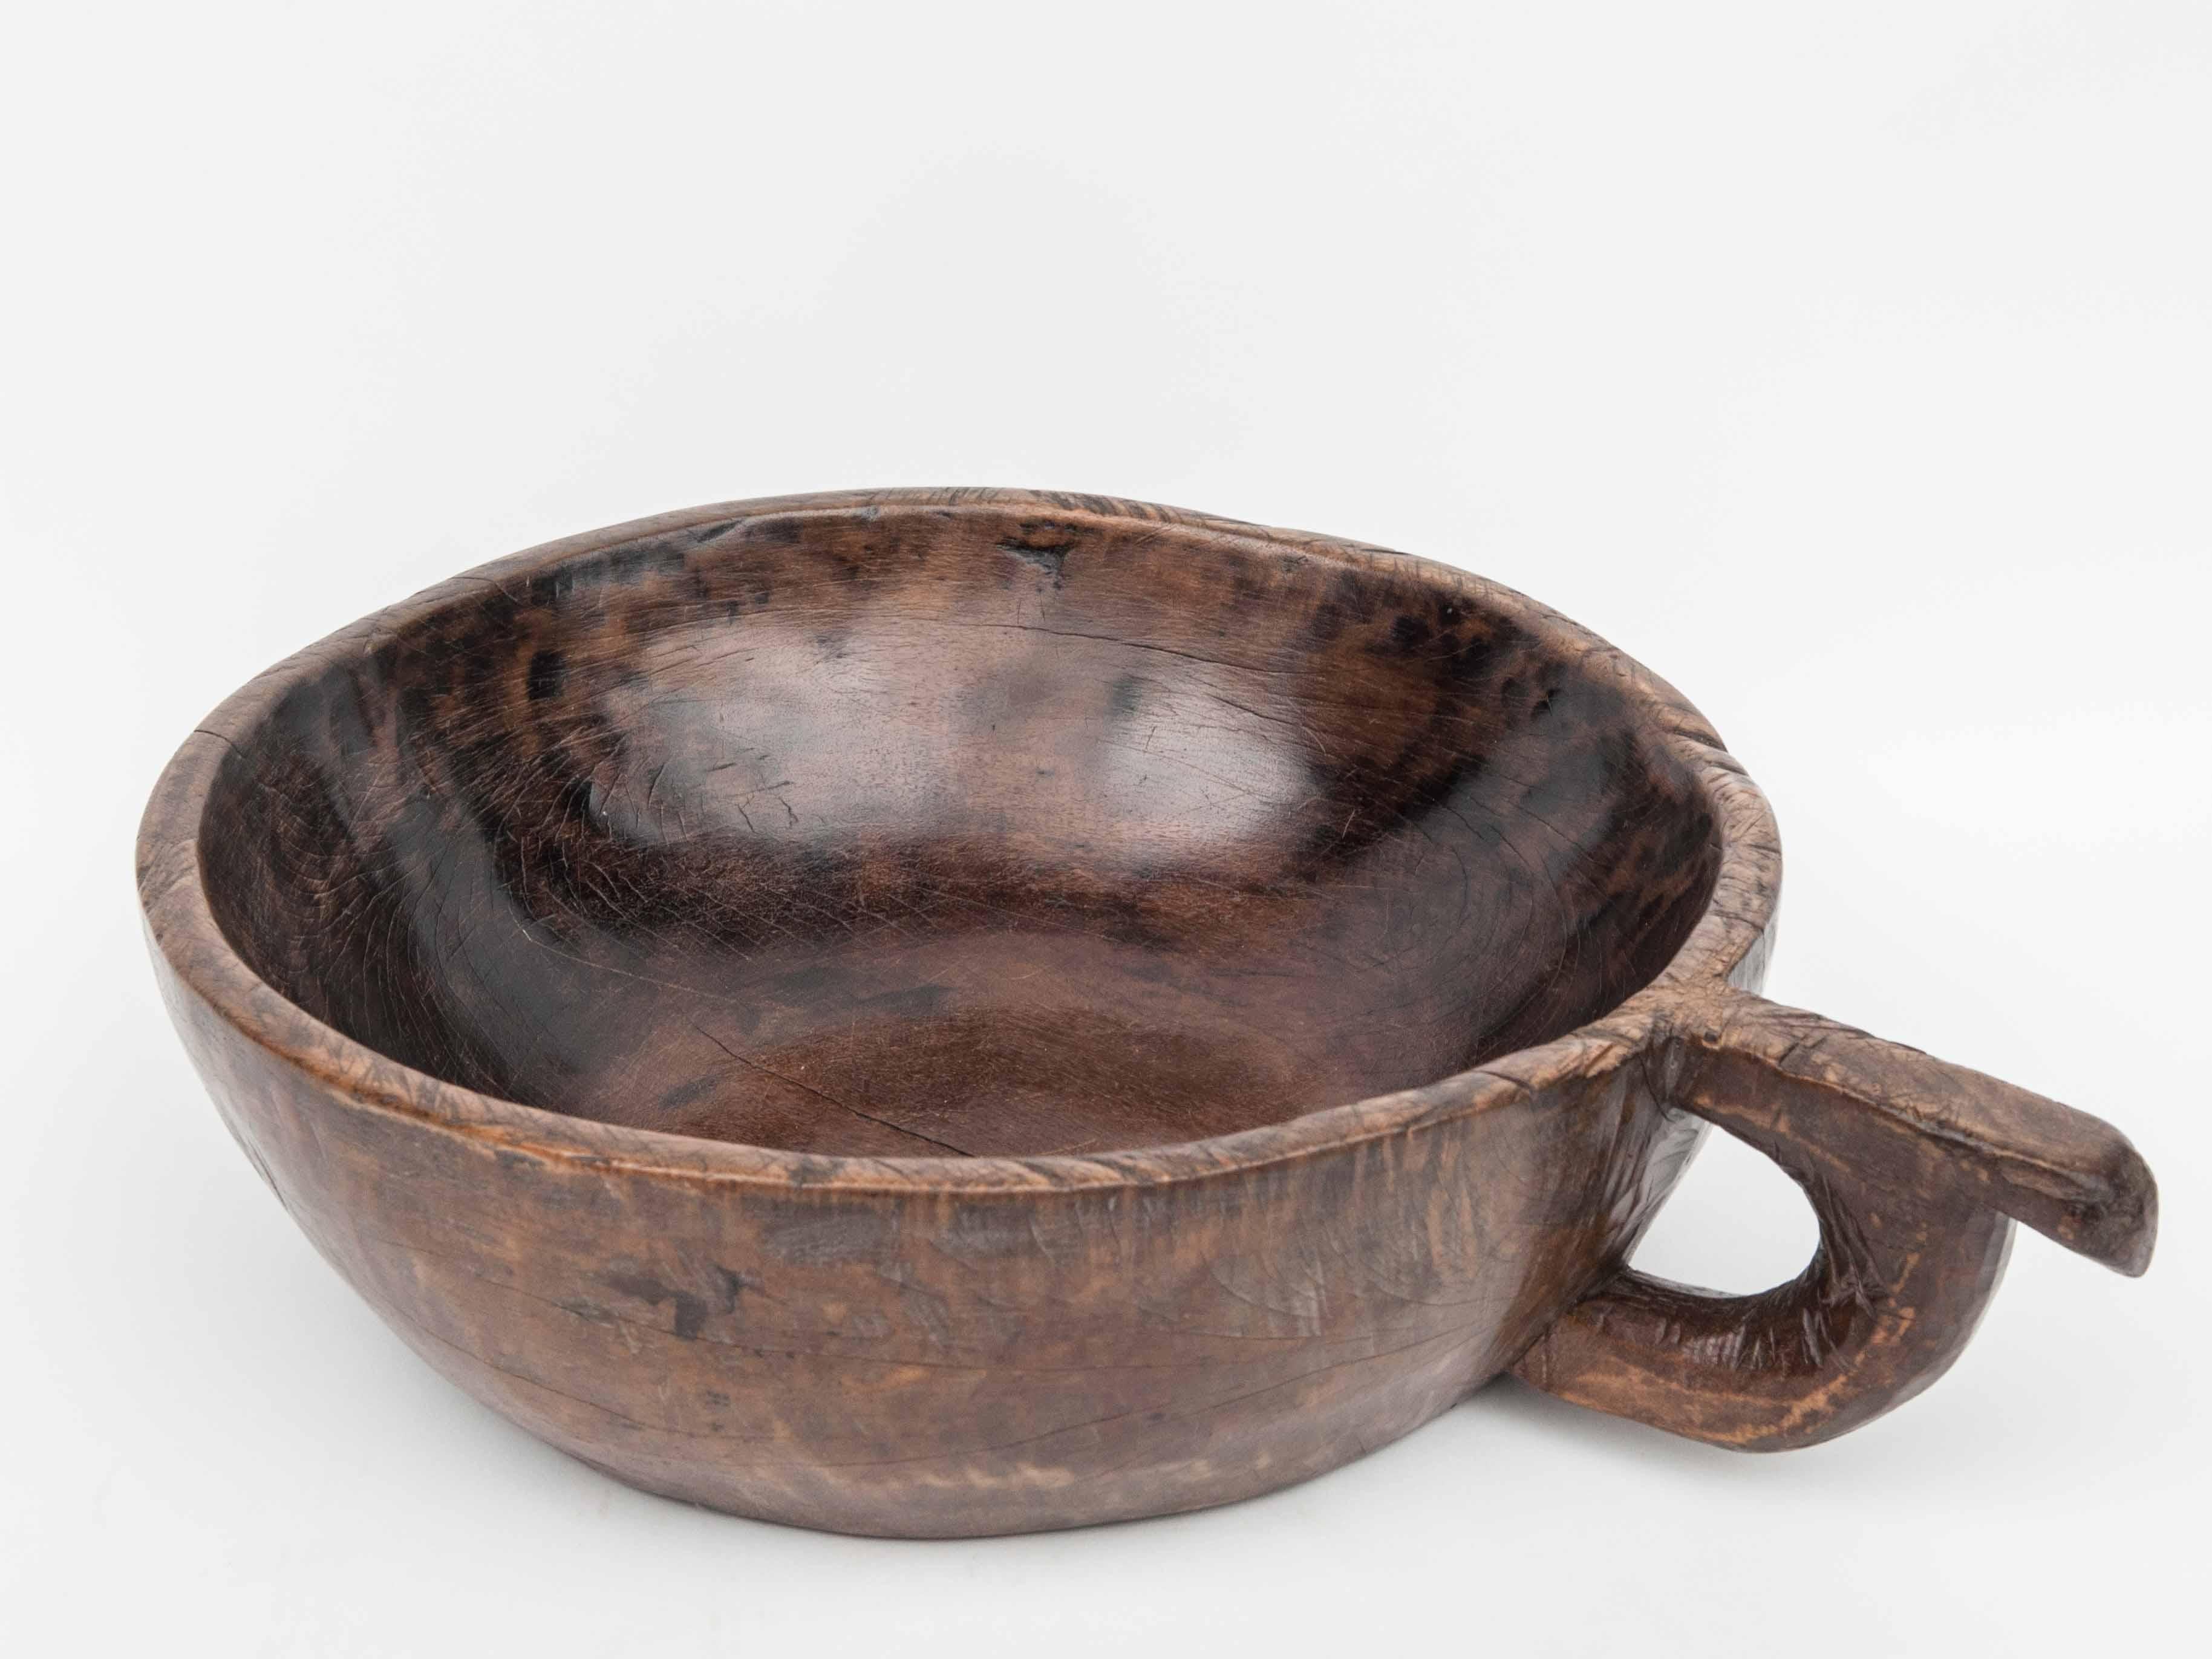 Indonesian Hand Hewn Wooden Bowl with Handle Sulawesi, Indonesia. Mid-Late 20th Century